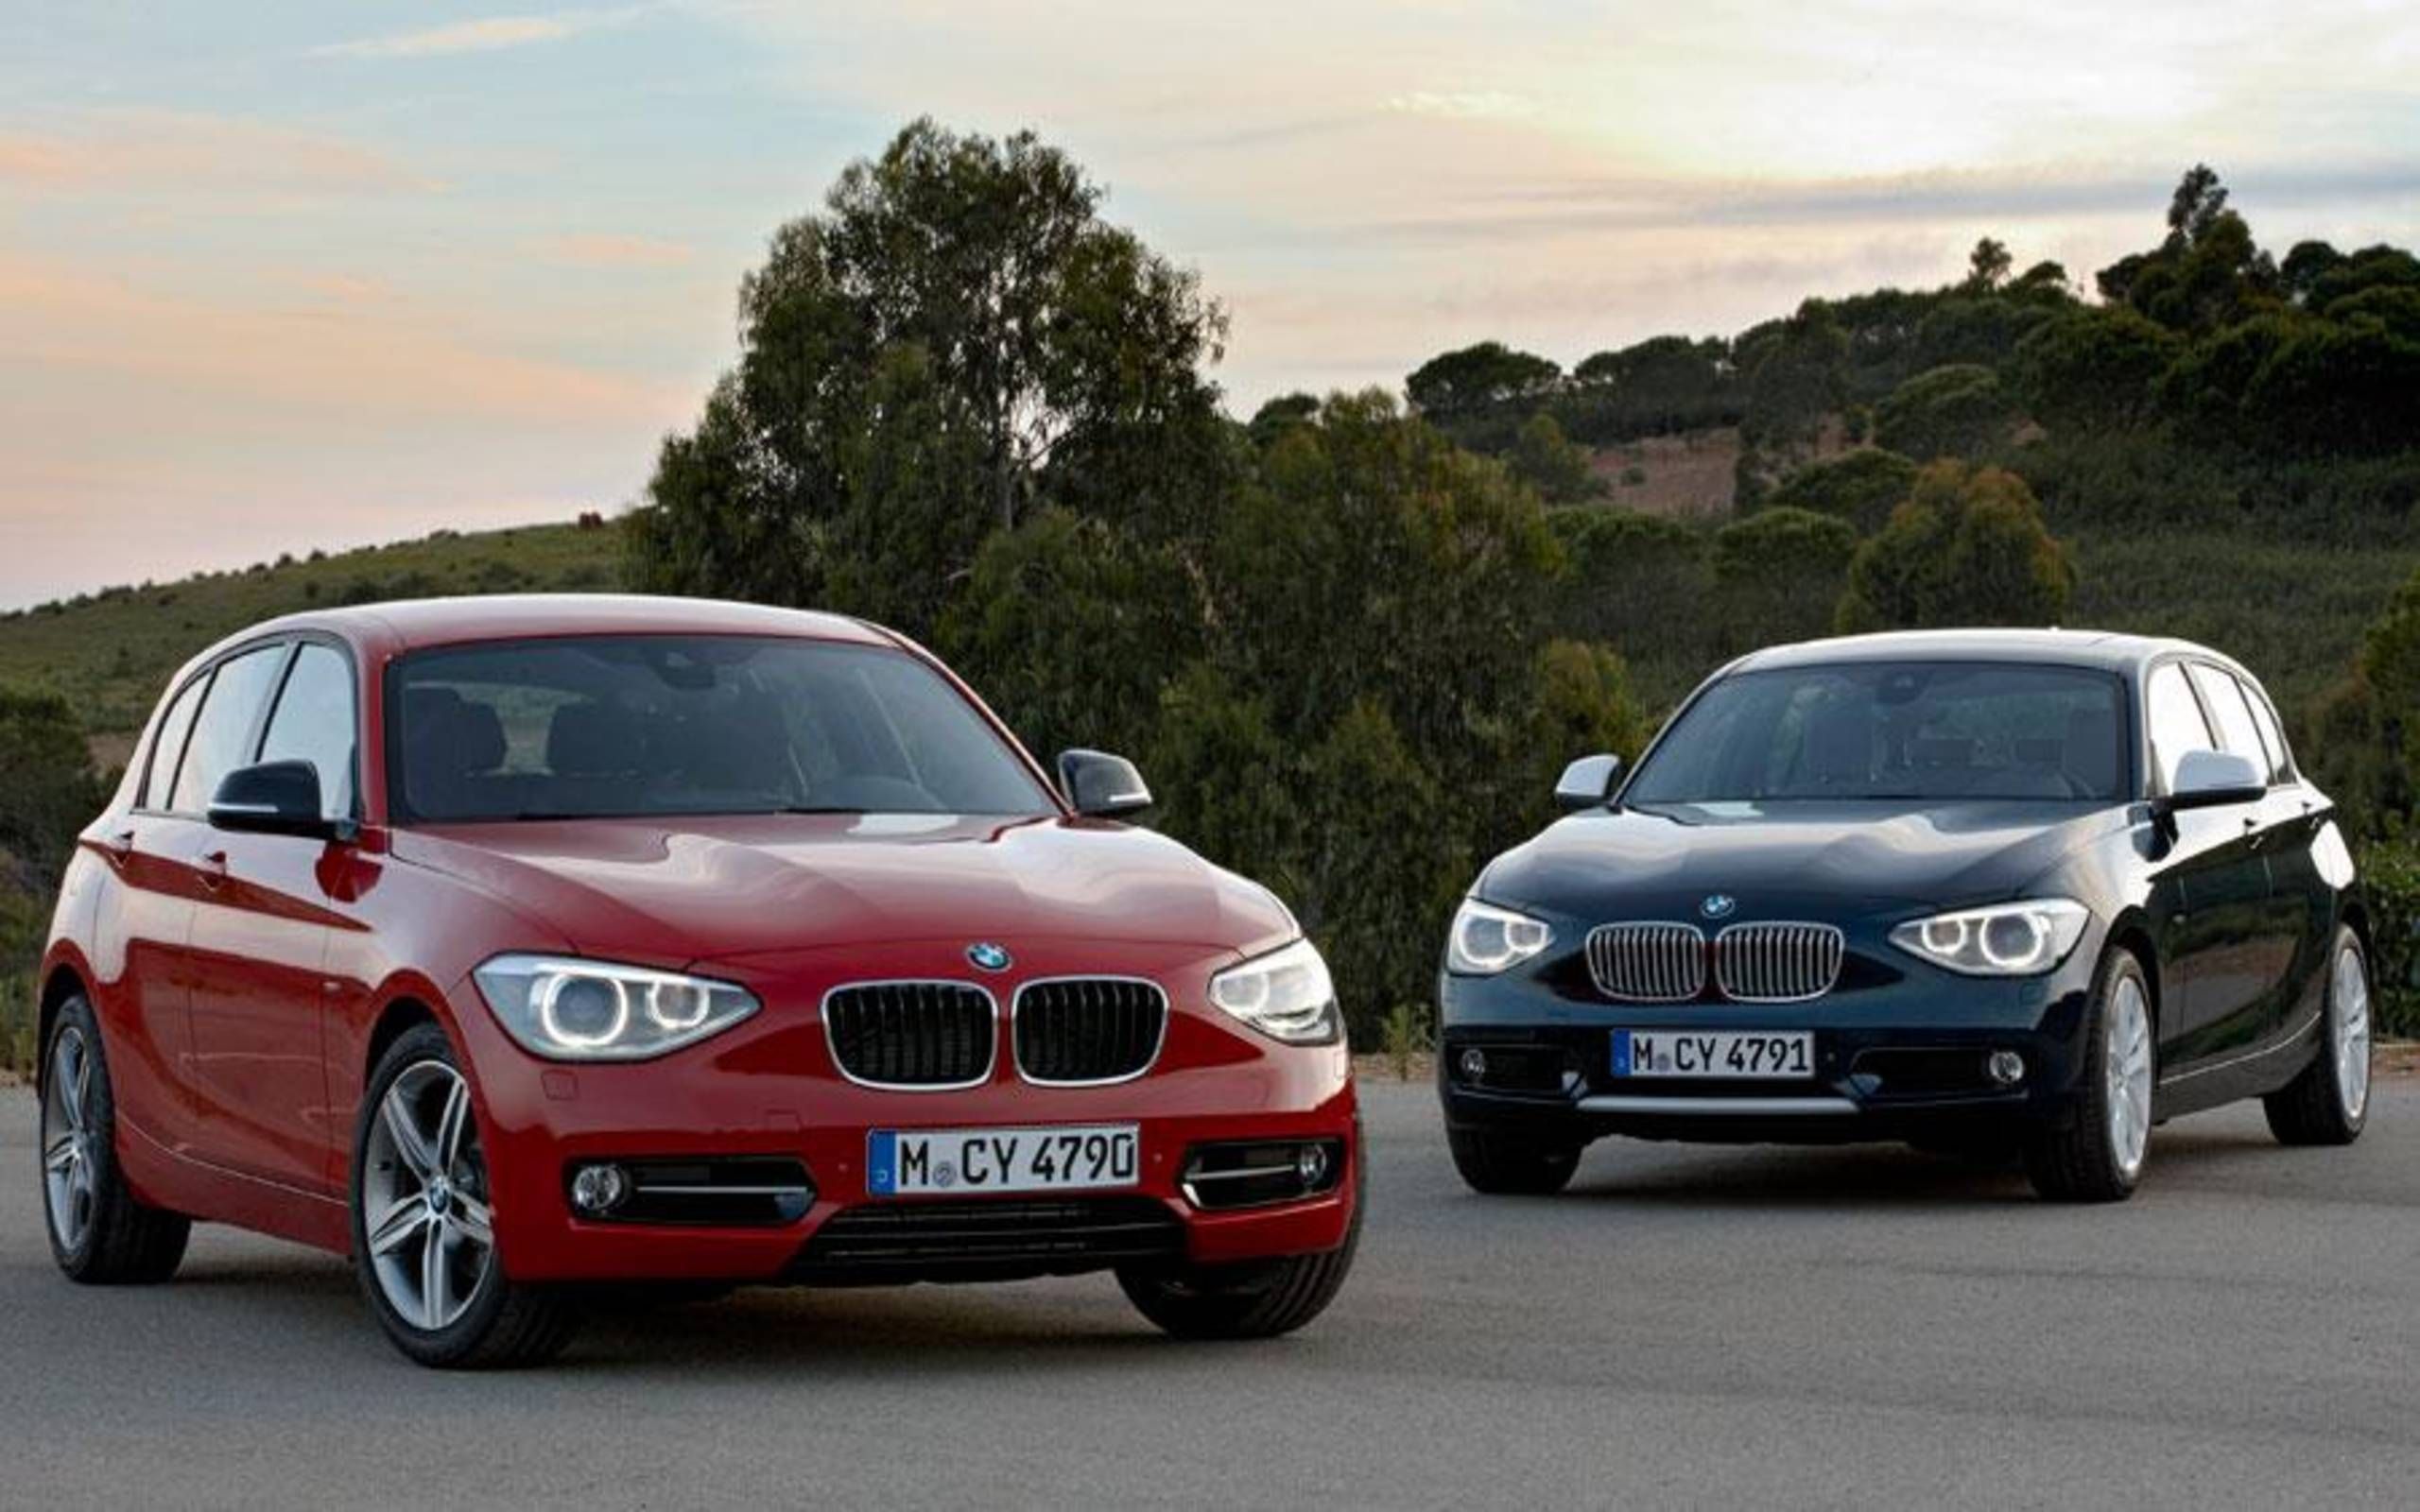 Een zekere Luidspreker verdieping New BMW 1-series bows with turbo four-cylinder power across the lineup